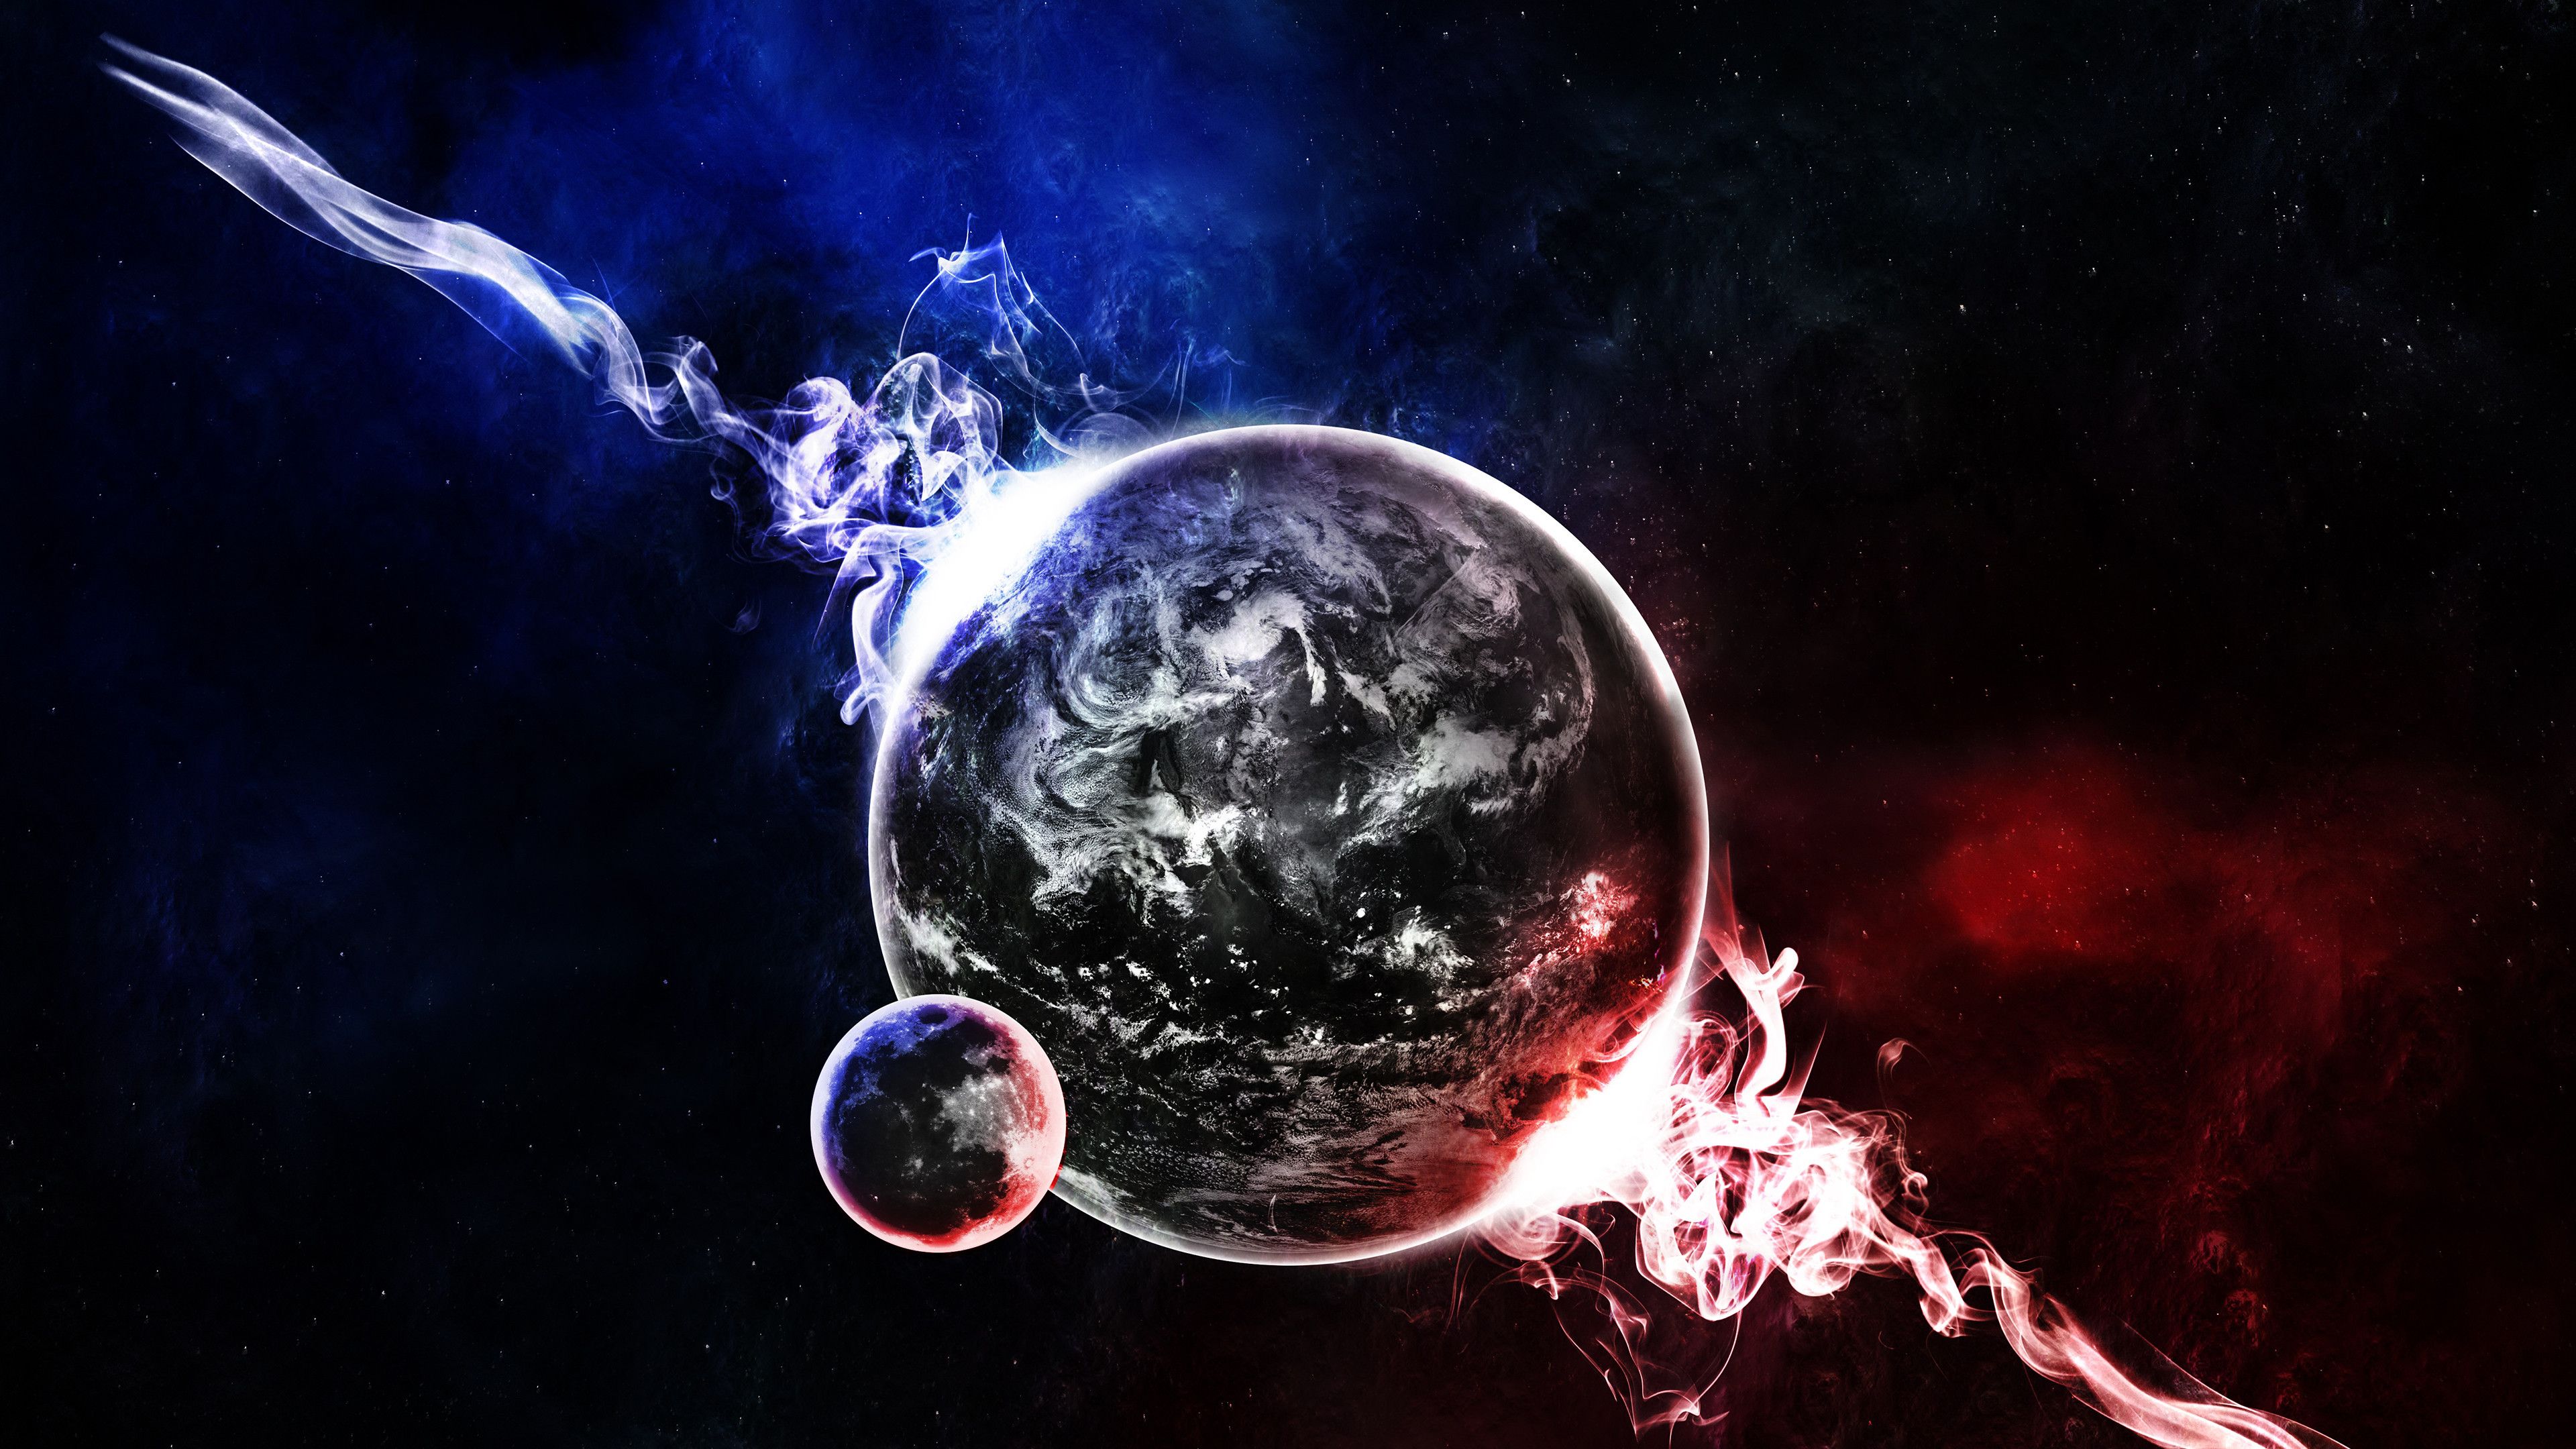 Cool Wallpaper Chromebook. mywallpaper site. Astral travel, Planets, Live earth